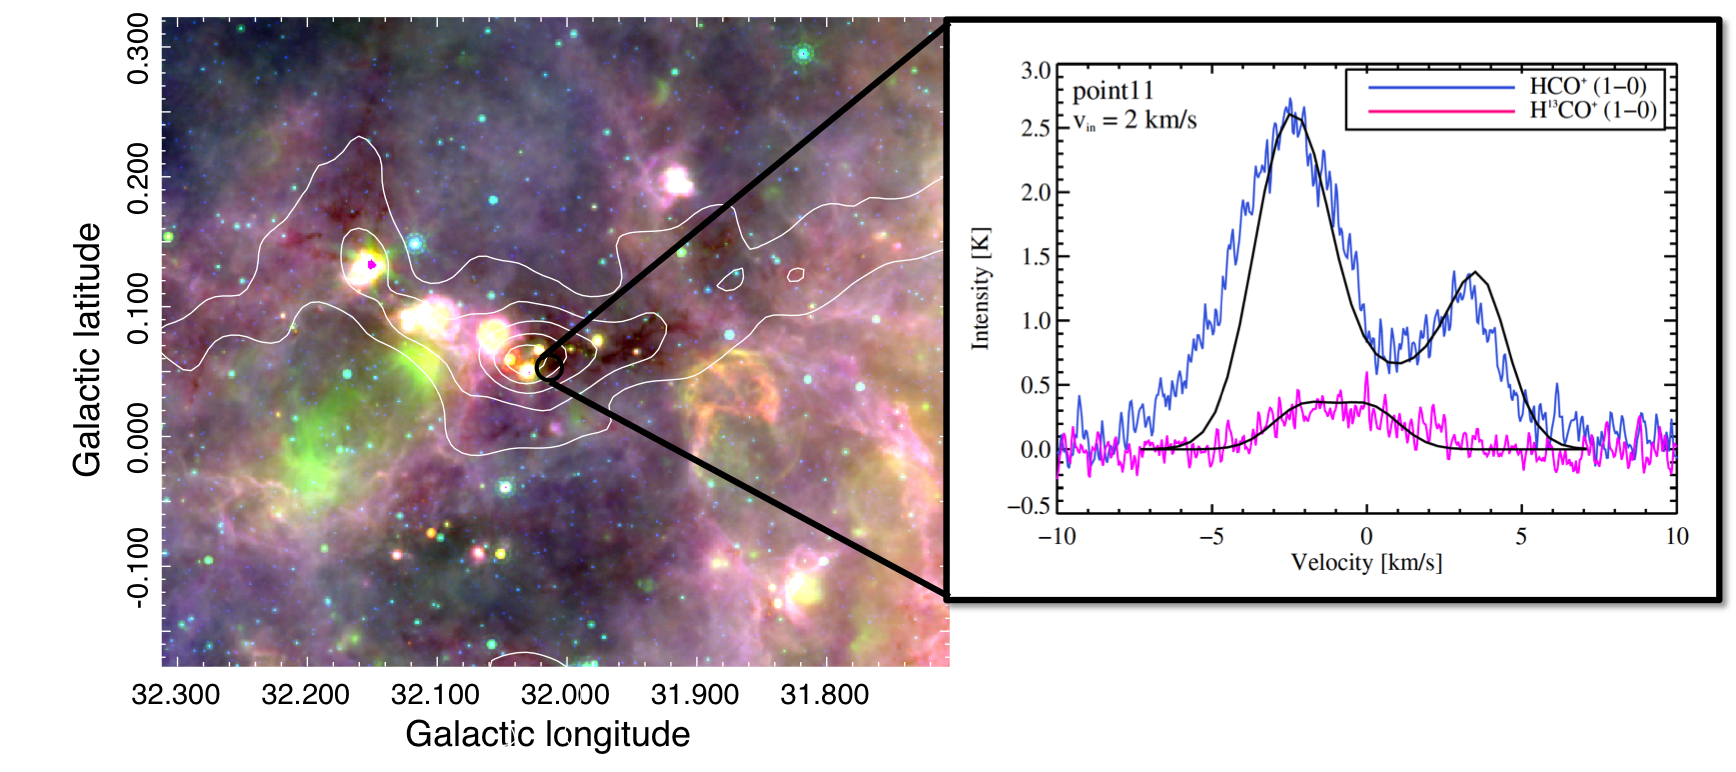 Gas accretion onto a forming star cluster